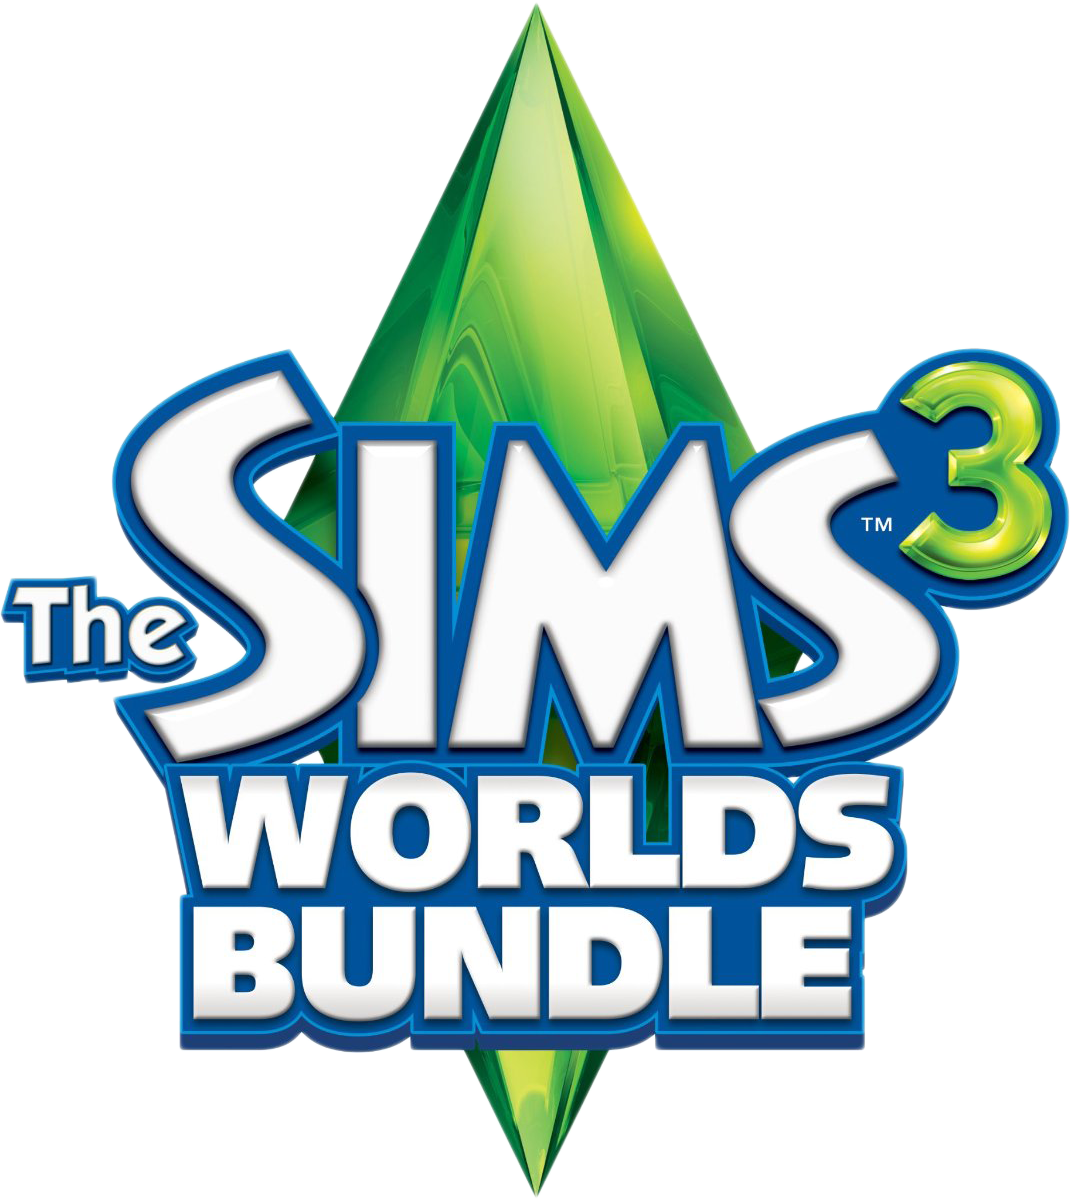 the sims 3 expansion packs